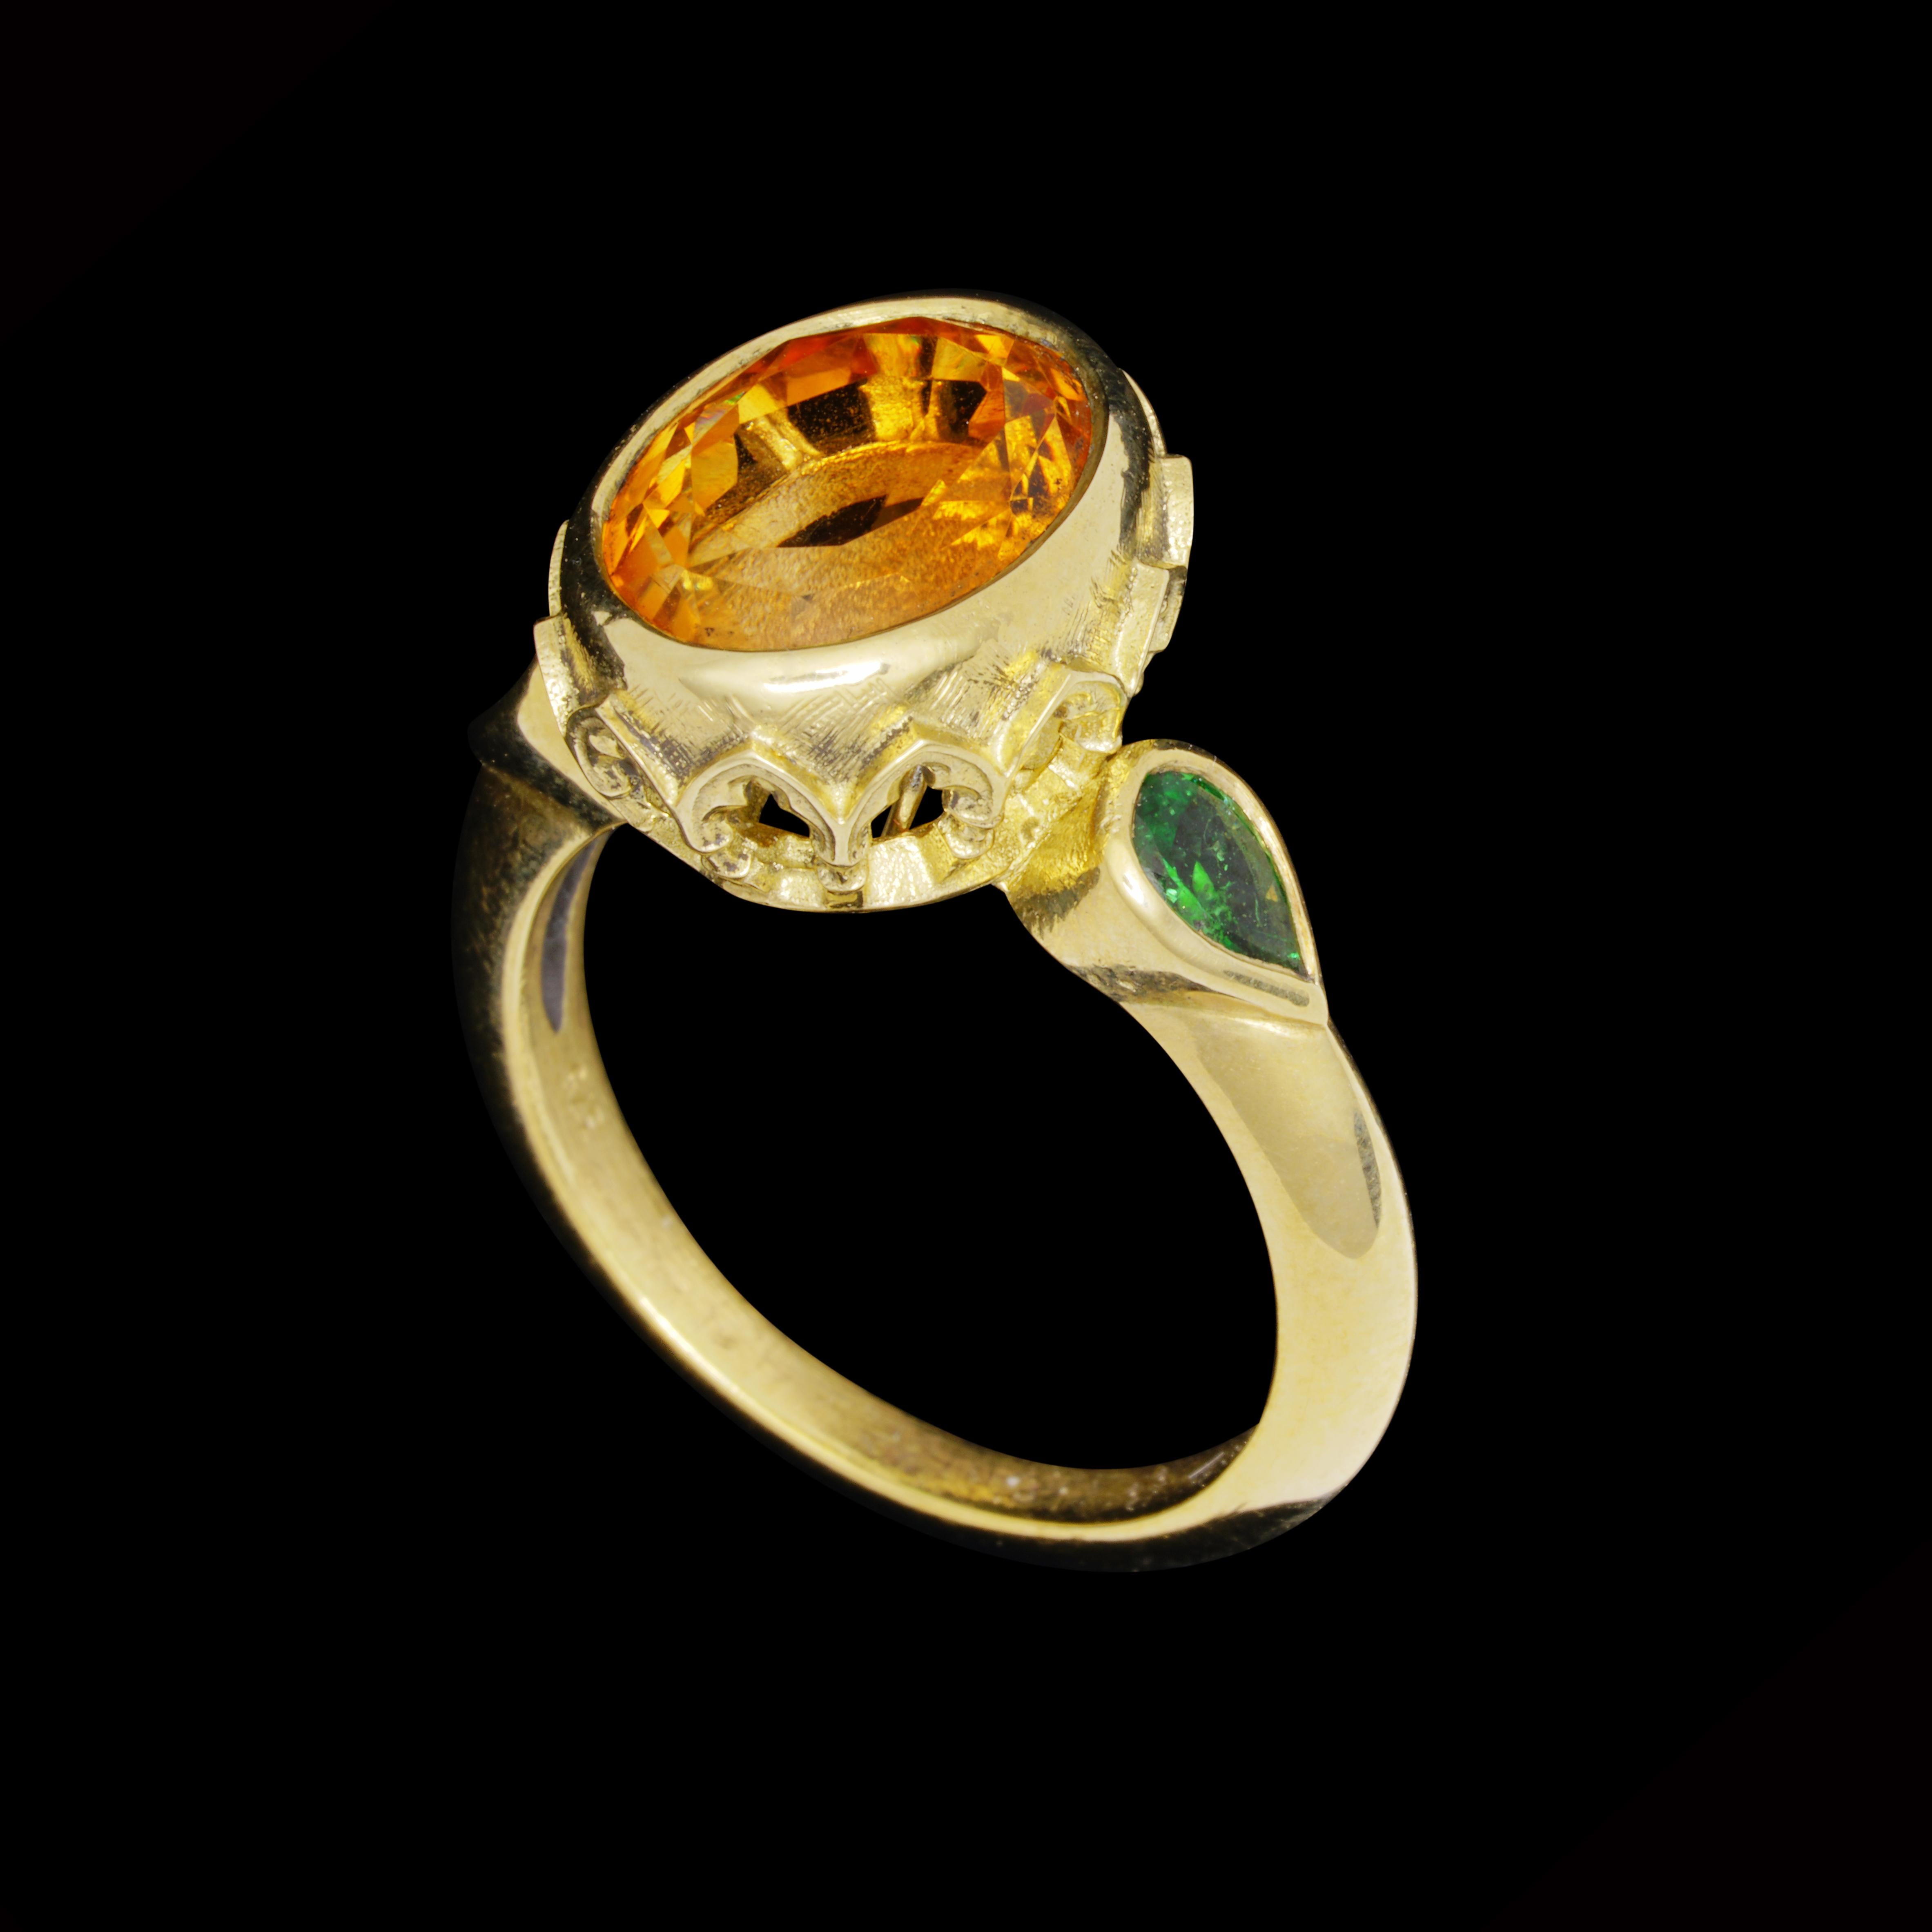 The vibrancy of this impeccable ring is utterly remarkable, it's colours conjuring the vivid orange groves of the garden of the Hesperides; Greek nymphs of evening and the golden light of sunsets.

Hand crafted in 9kt yellow gold, this alluring ring